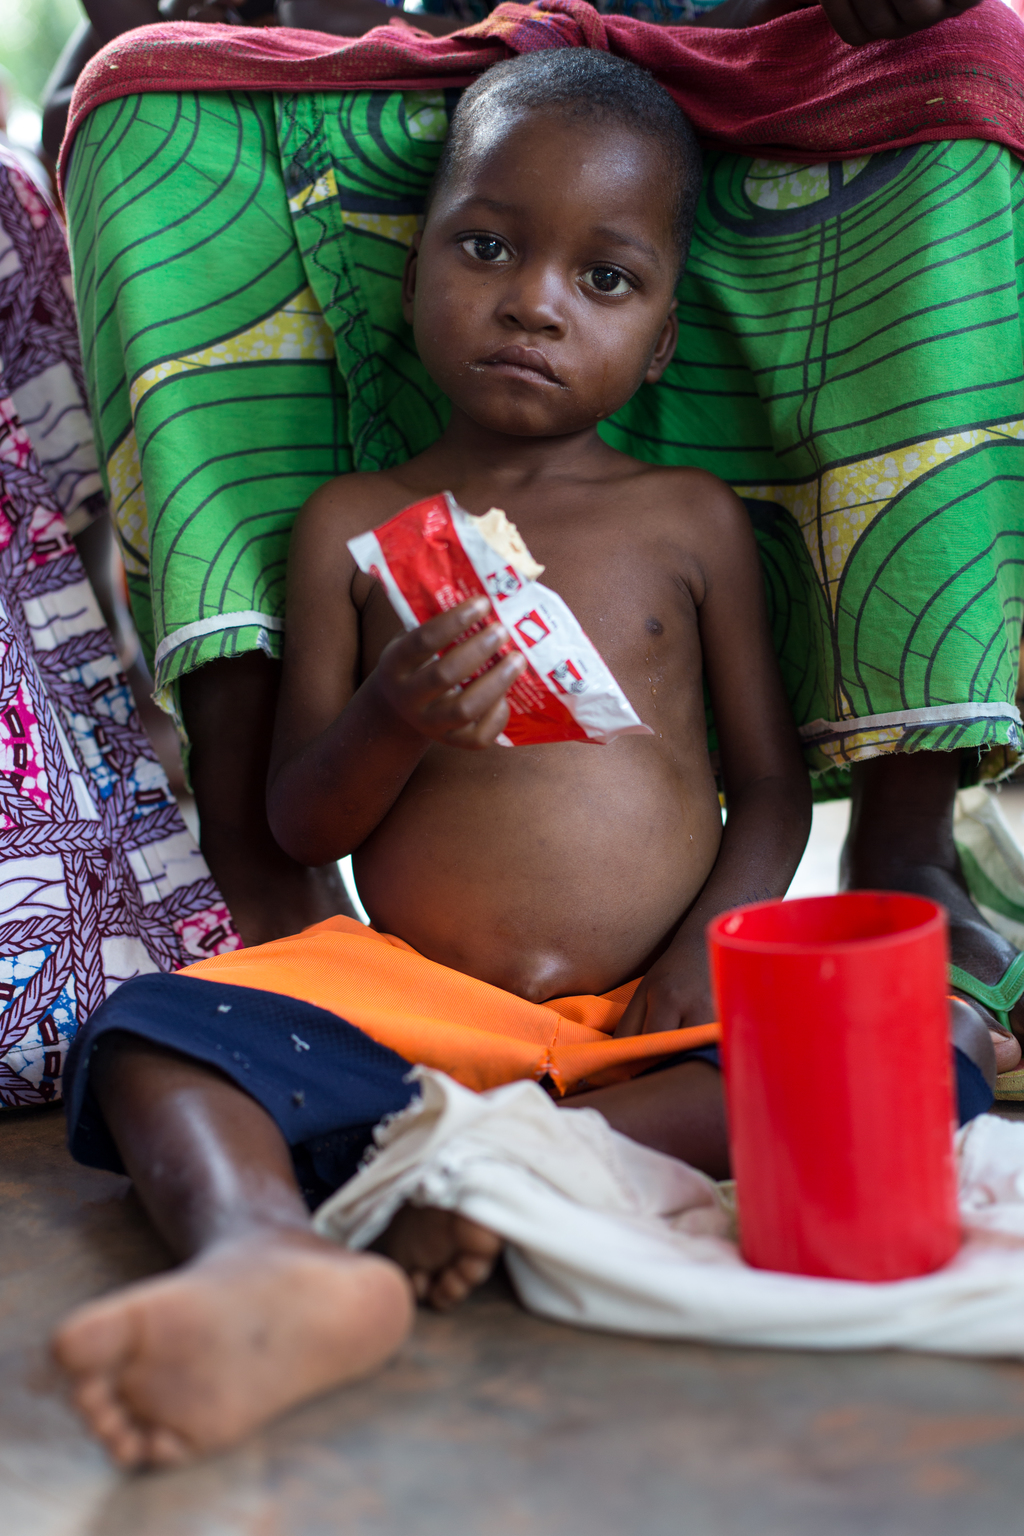 A child suffering from malnutrition is feeding himself with Plumpy Nut - ready-to-use therapeutic food - offered by UNICEF to the health center of Tshinyama, a village near Miabi, located 30 km north-west of Mbuji-mayi, in the direction of Kananga, in the province of Kasai Orientale, in the south Of the Democratic Republic of the Congo, a region plagued by conflict between the militia of the traditional leader Kamuina Nsapu and the Armed Forces of the Democratic Republic of the Congo (FARDC) since June 2016. - Un enfant souffrant de malnutrition se nourrit de « Plumpy Nut », de la nourriture thérapeutique prête à l'emploi, offerte par l'UNICEF au centre de santé de Tshinyama, un petit village proche de Miabi, situé à 30 km au nord-ouest de Mbuji-mayi, en direction de Kananga, dans la province du Kasaï Orientale, au sud de la République démocratique du Congo, une région en proie aux conflits entre les miliciens du chef traditionnel Kamuina Nsapu et les Forces Armées de la République Démocratique du Congo (FARDC) depuis juin 2016. In August 2016, fighting broke out in one of the Democratic Republic of Congos (DRC) poorest regions - Kasai - after a traditional leader was killed in clashes with security forces. The situation deteriorated in 2017, unleashing a wave of violence that has now engulfed nine of the countrys 26 provinces.